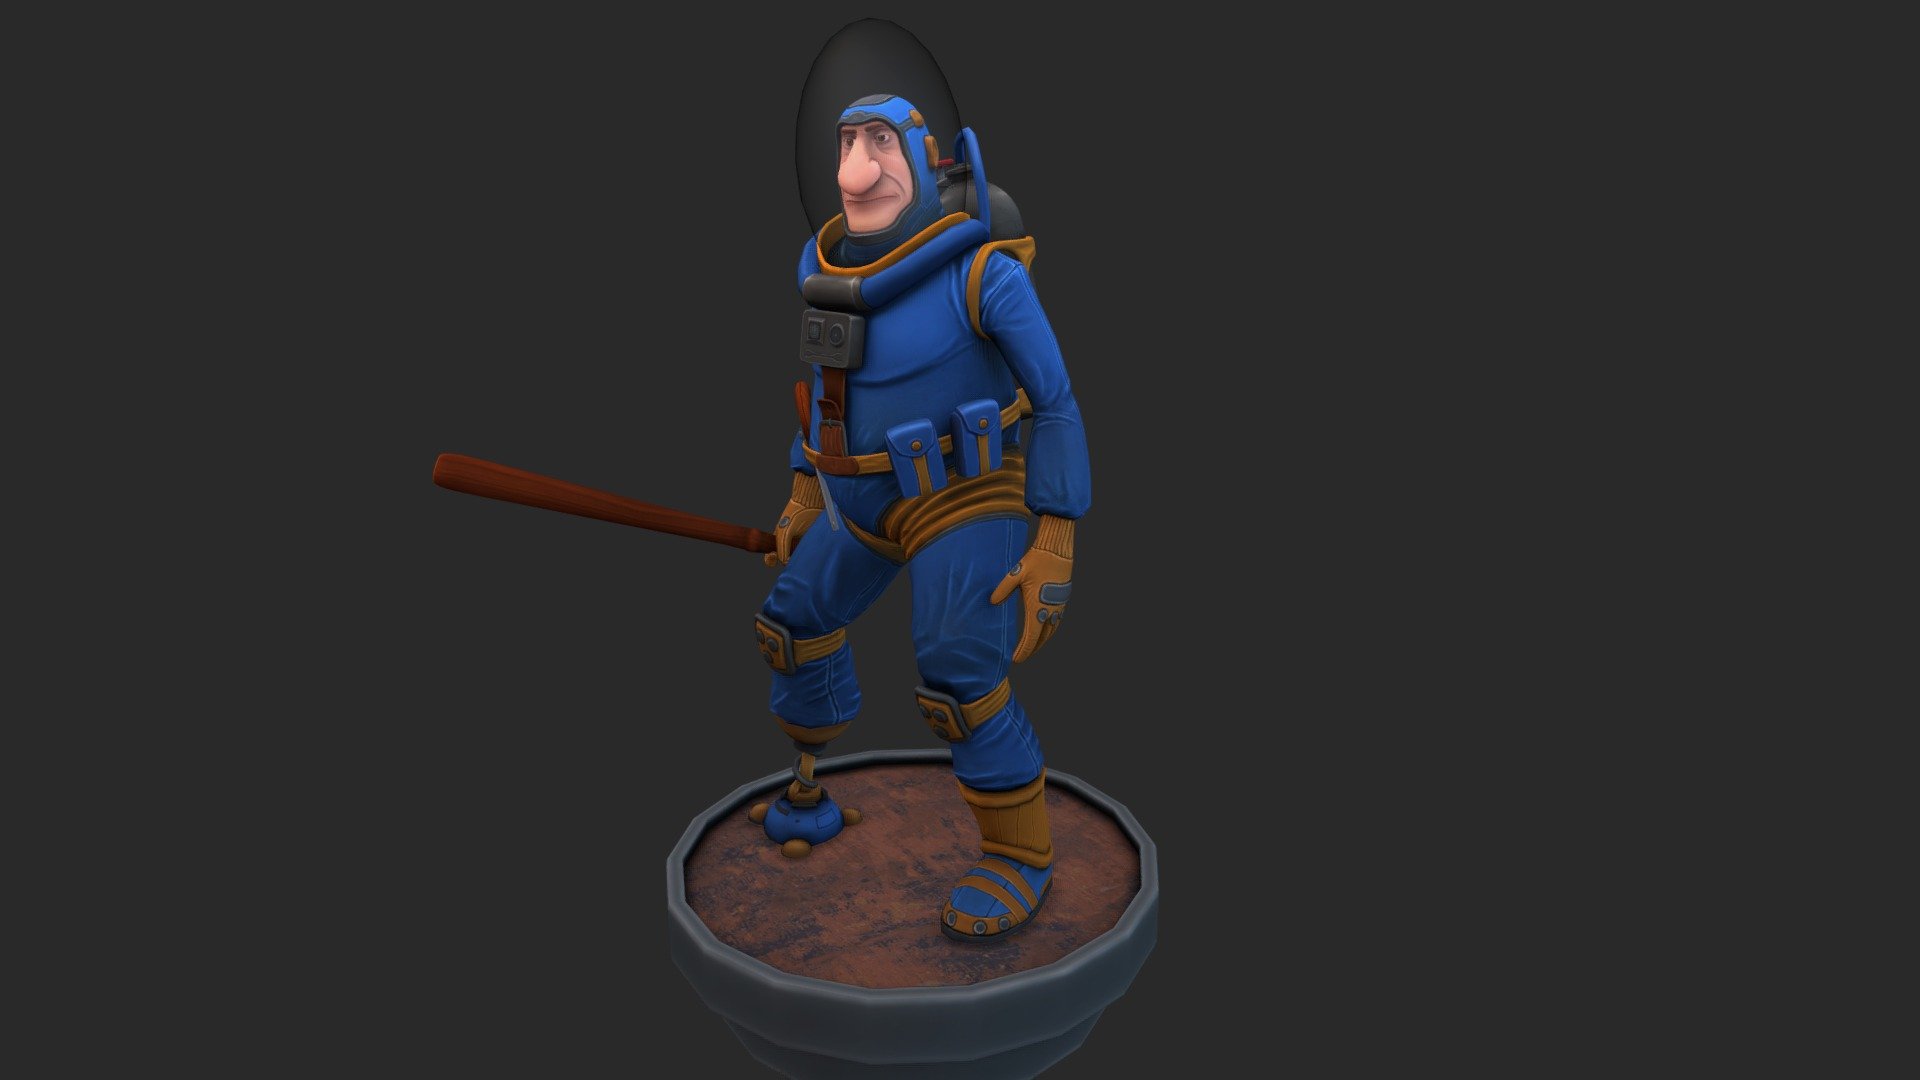 I hand an idea of making a low tech astonaut that does not use laser weapons or similar, but goes around with a bat and a smug. 
I've used the concept sketch that I found online to build the basemesh in max, sculpt in zbrush and retopo in max again.
Model is lowpoly, and the reason for the sculpt was to extract AO, Normal and Bent Normal maps from the sculpt in order to bake a detailed map of the highlights and shadows onto the retopo model.
I've used the green channel from bent normal to simulate highlights from the &ldquo;above